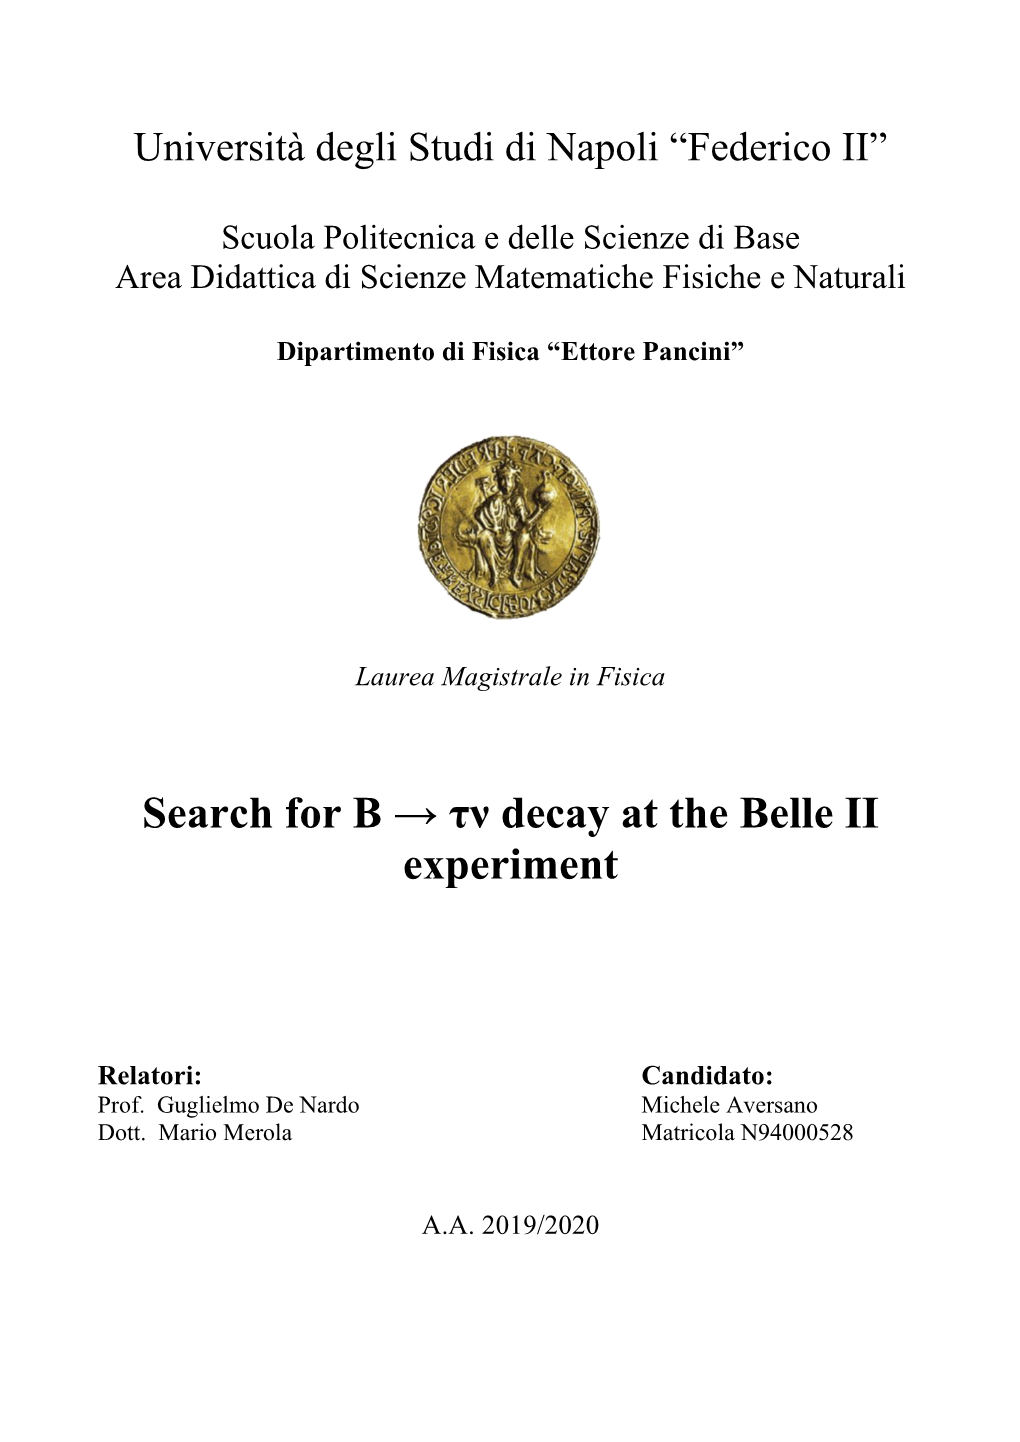 Search for B → Τν Decay at the Belle II Experiment